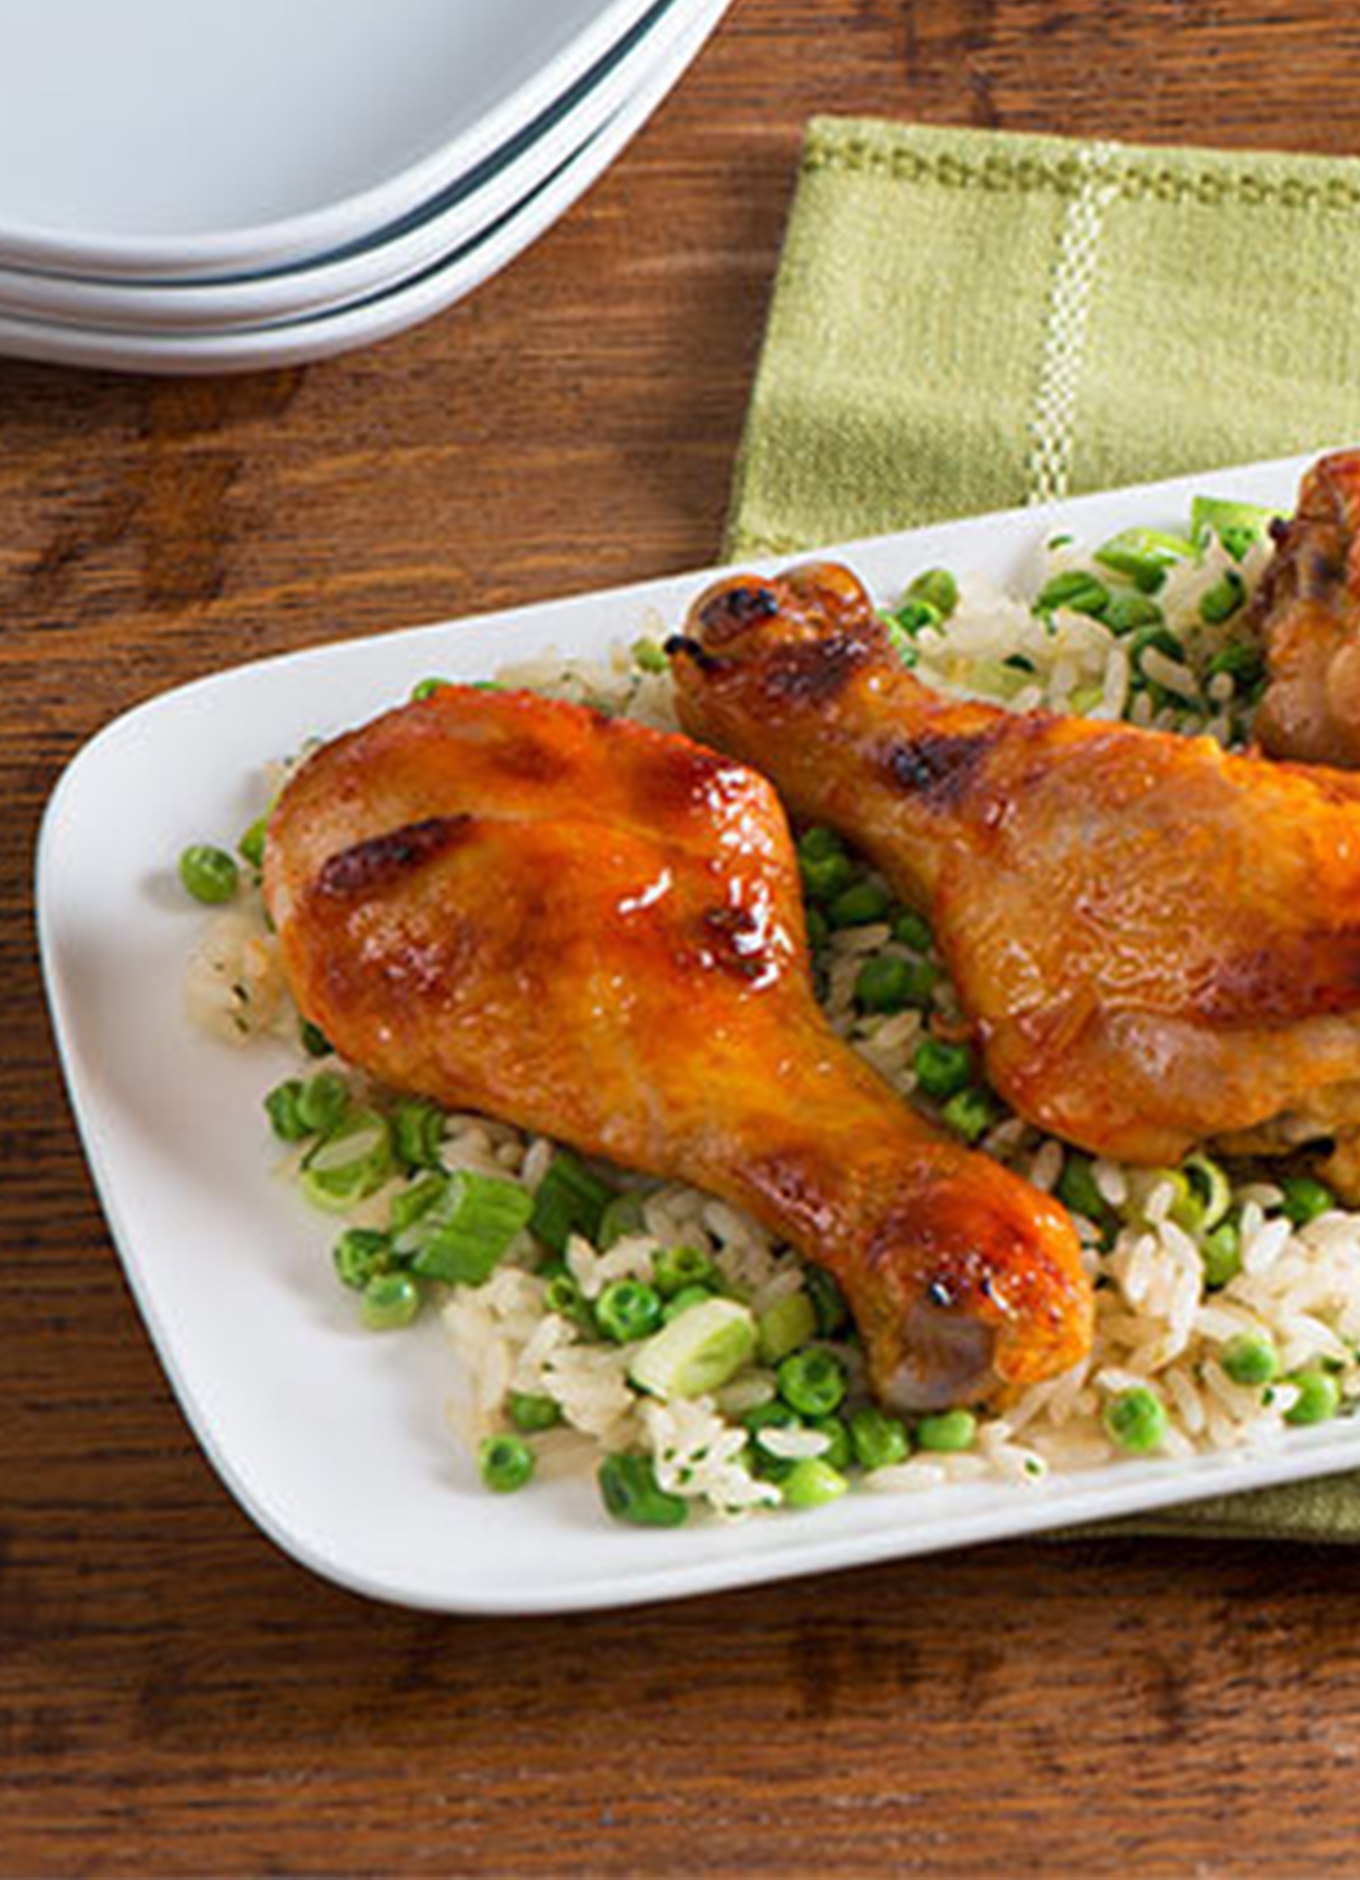 A tray of roast drumsticks with a honey and Sriracha glaze served on a bed of rice and peas.